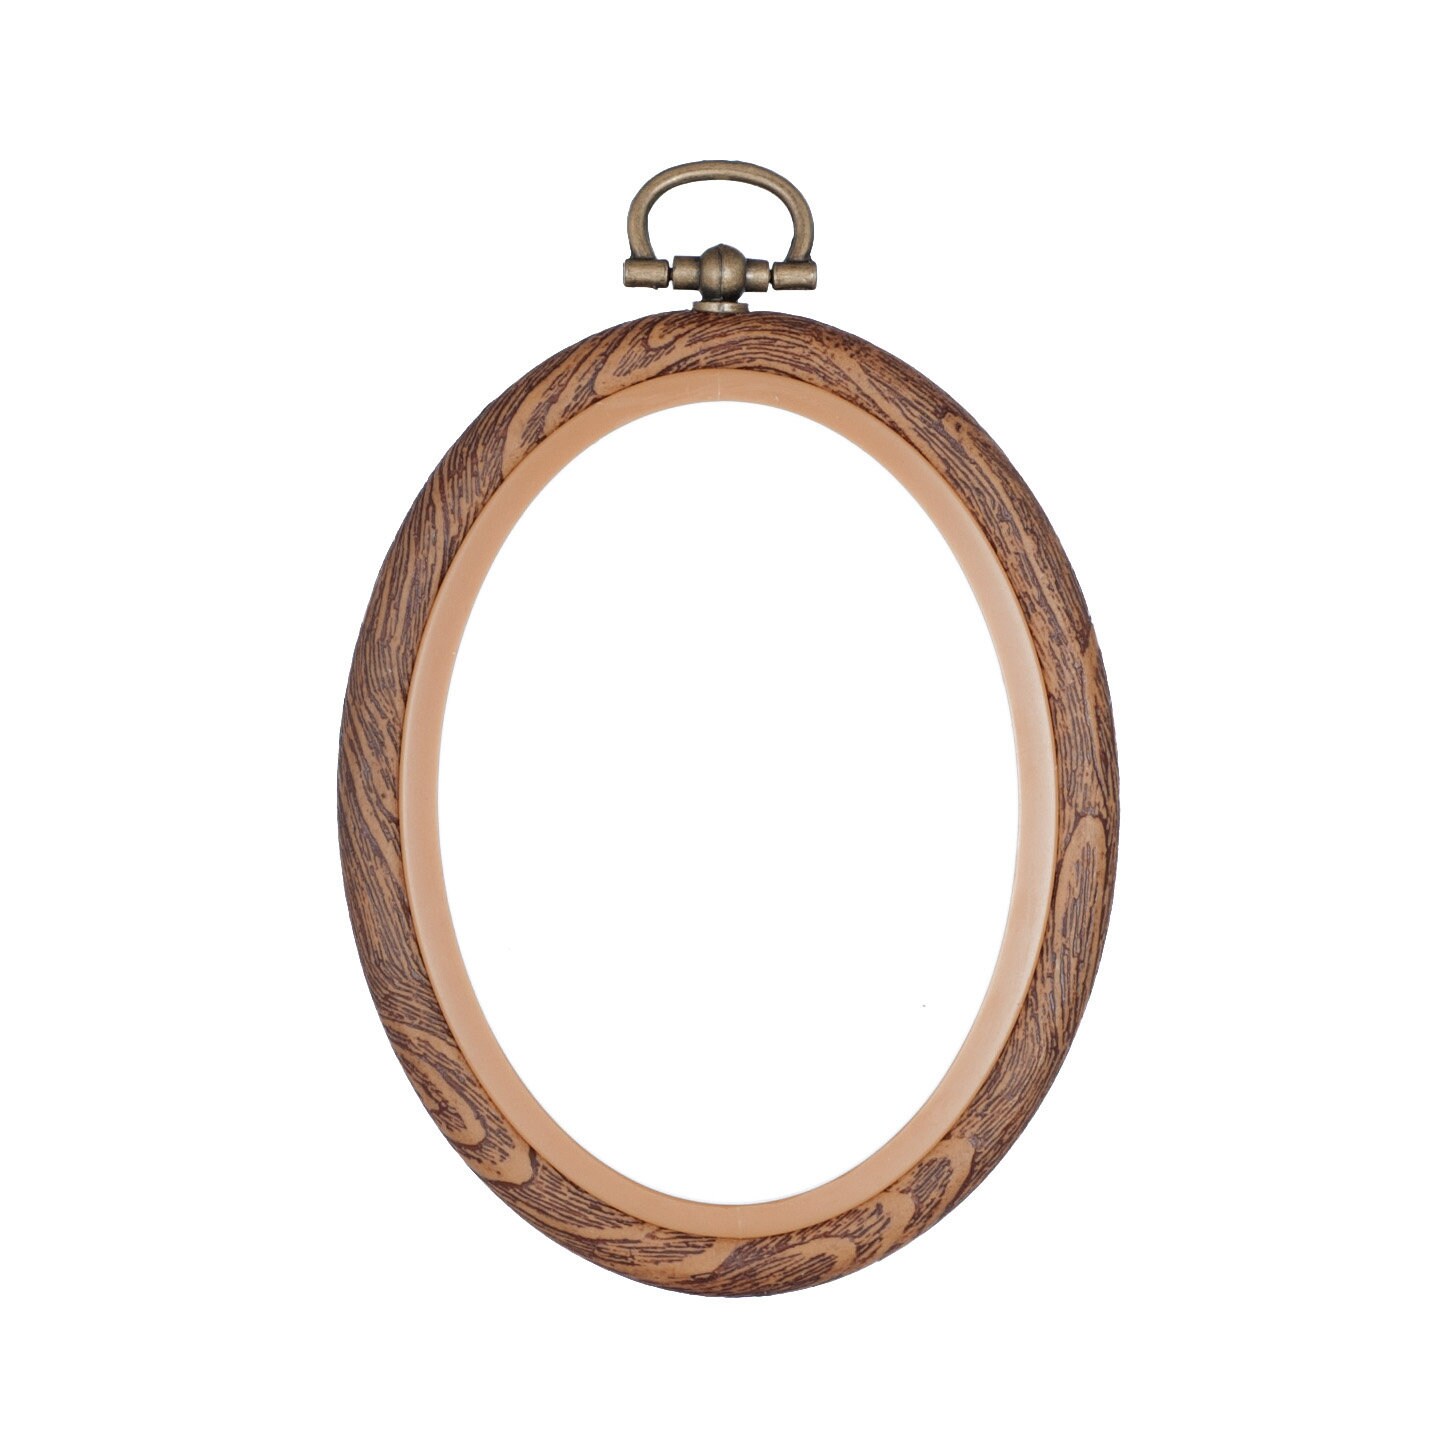 Oval Embroidery Hoop, Hang on the Wall, Flexi Hoop for Hand Embroidery,  Embroidery Display, Wooden Imitation, Cross Stitch Hoop, 